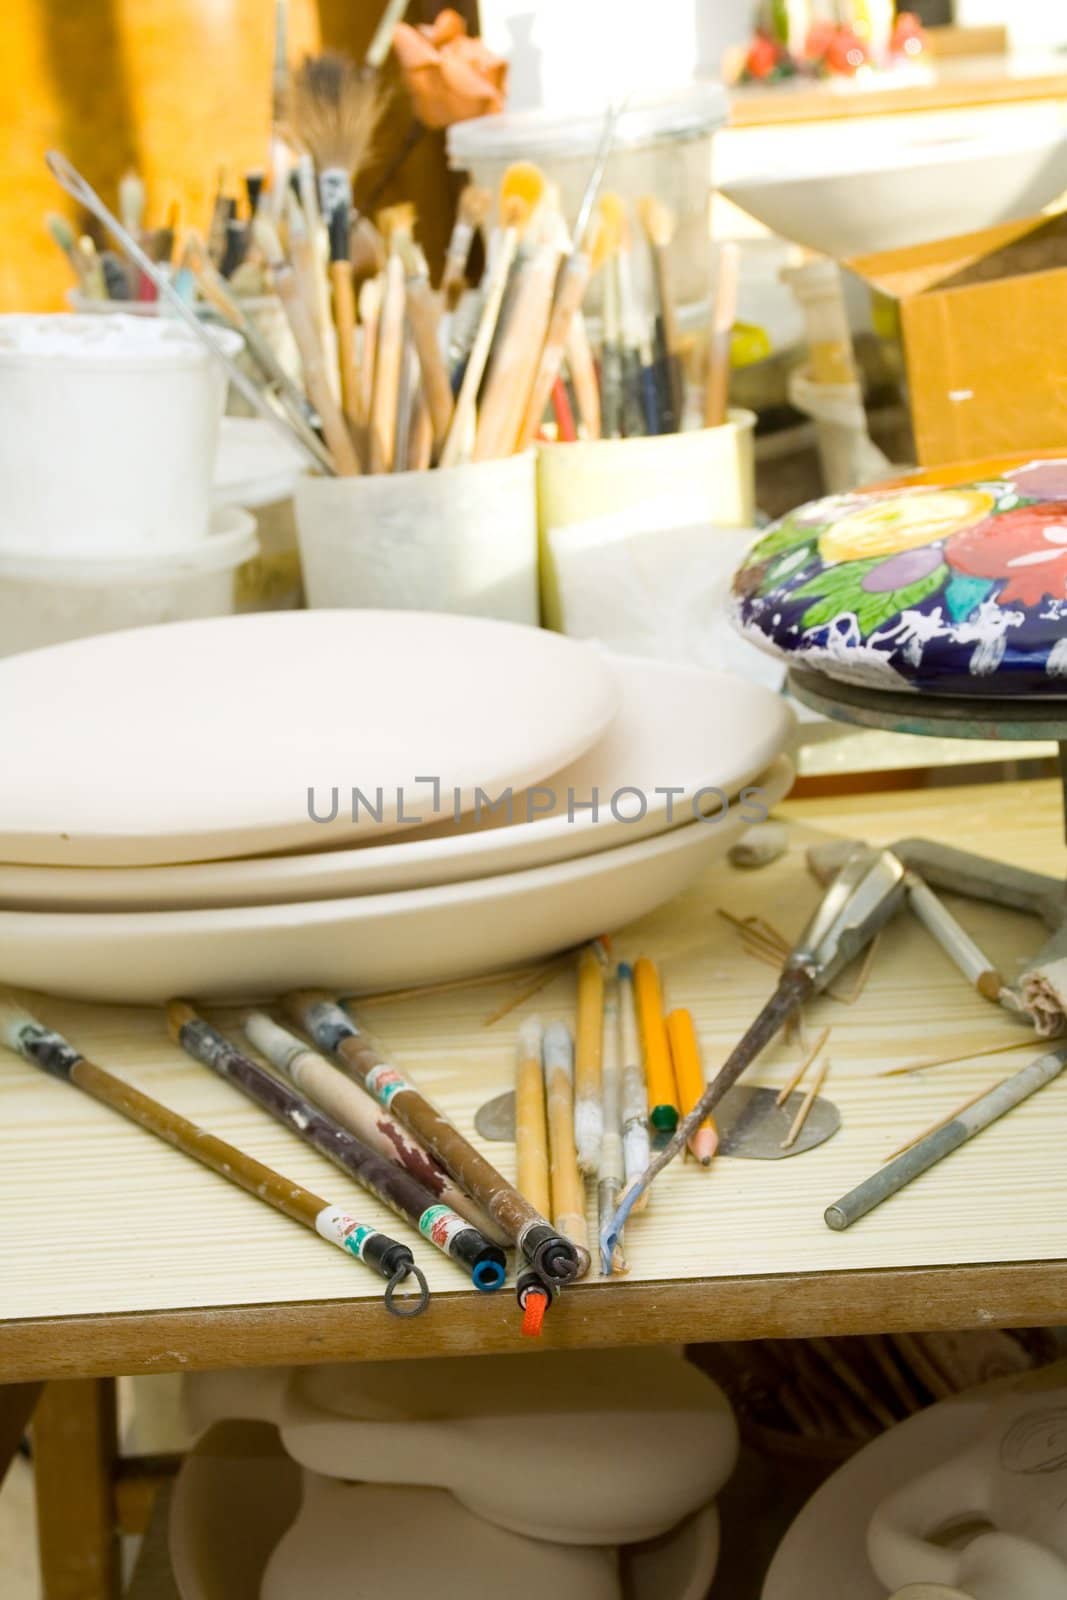 Workplace in the artist's studio. Brushes, tools and materials